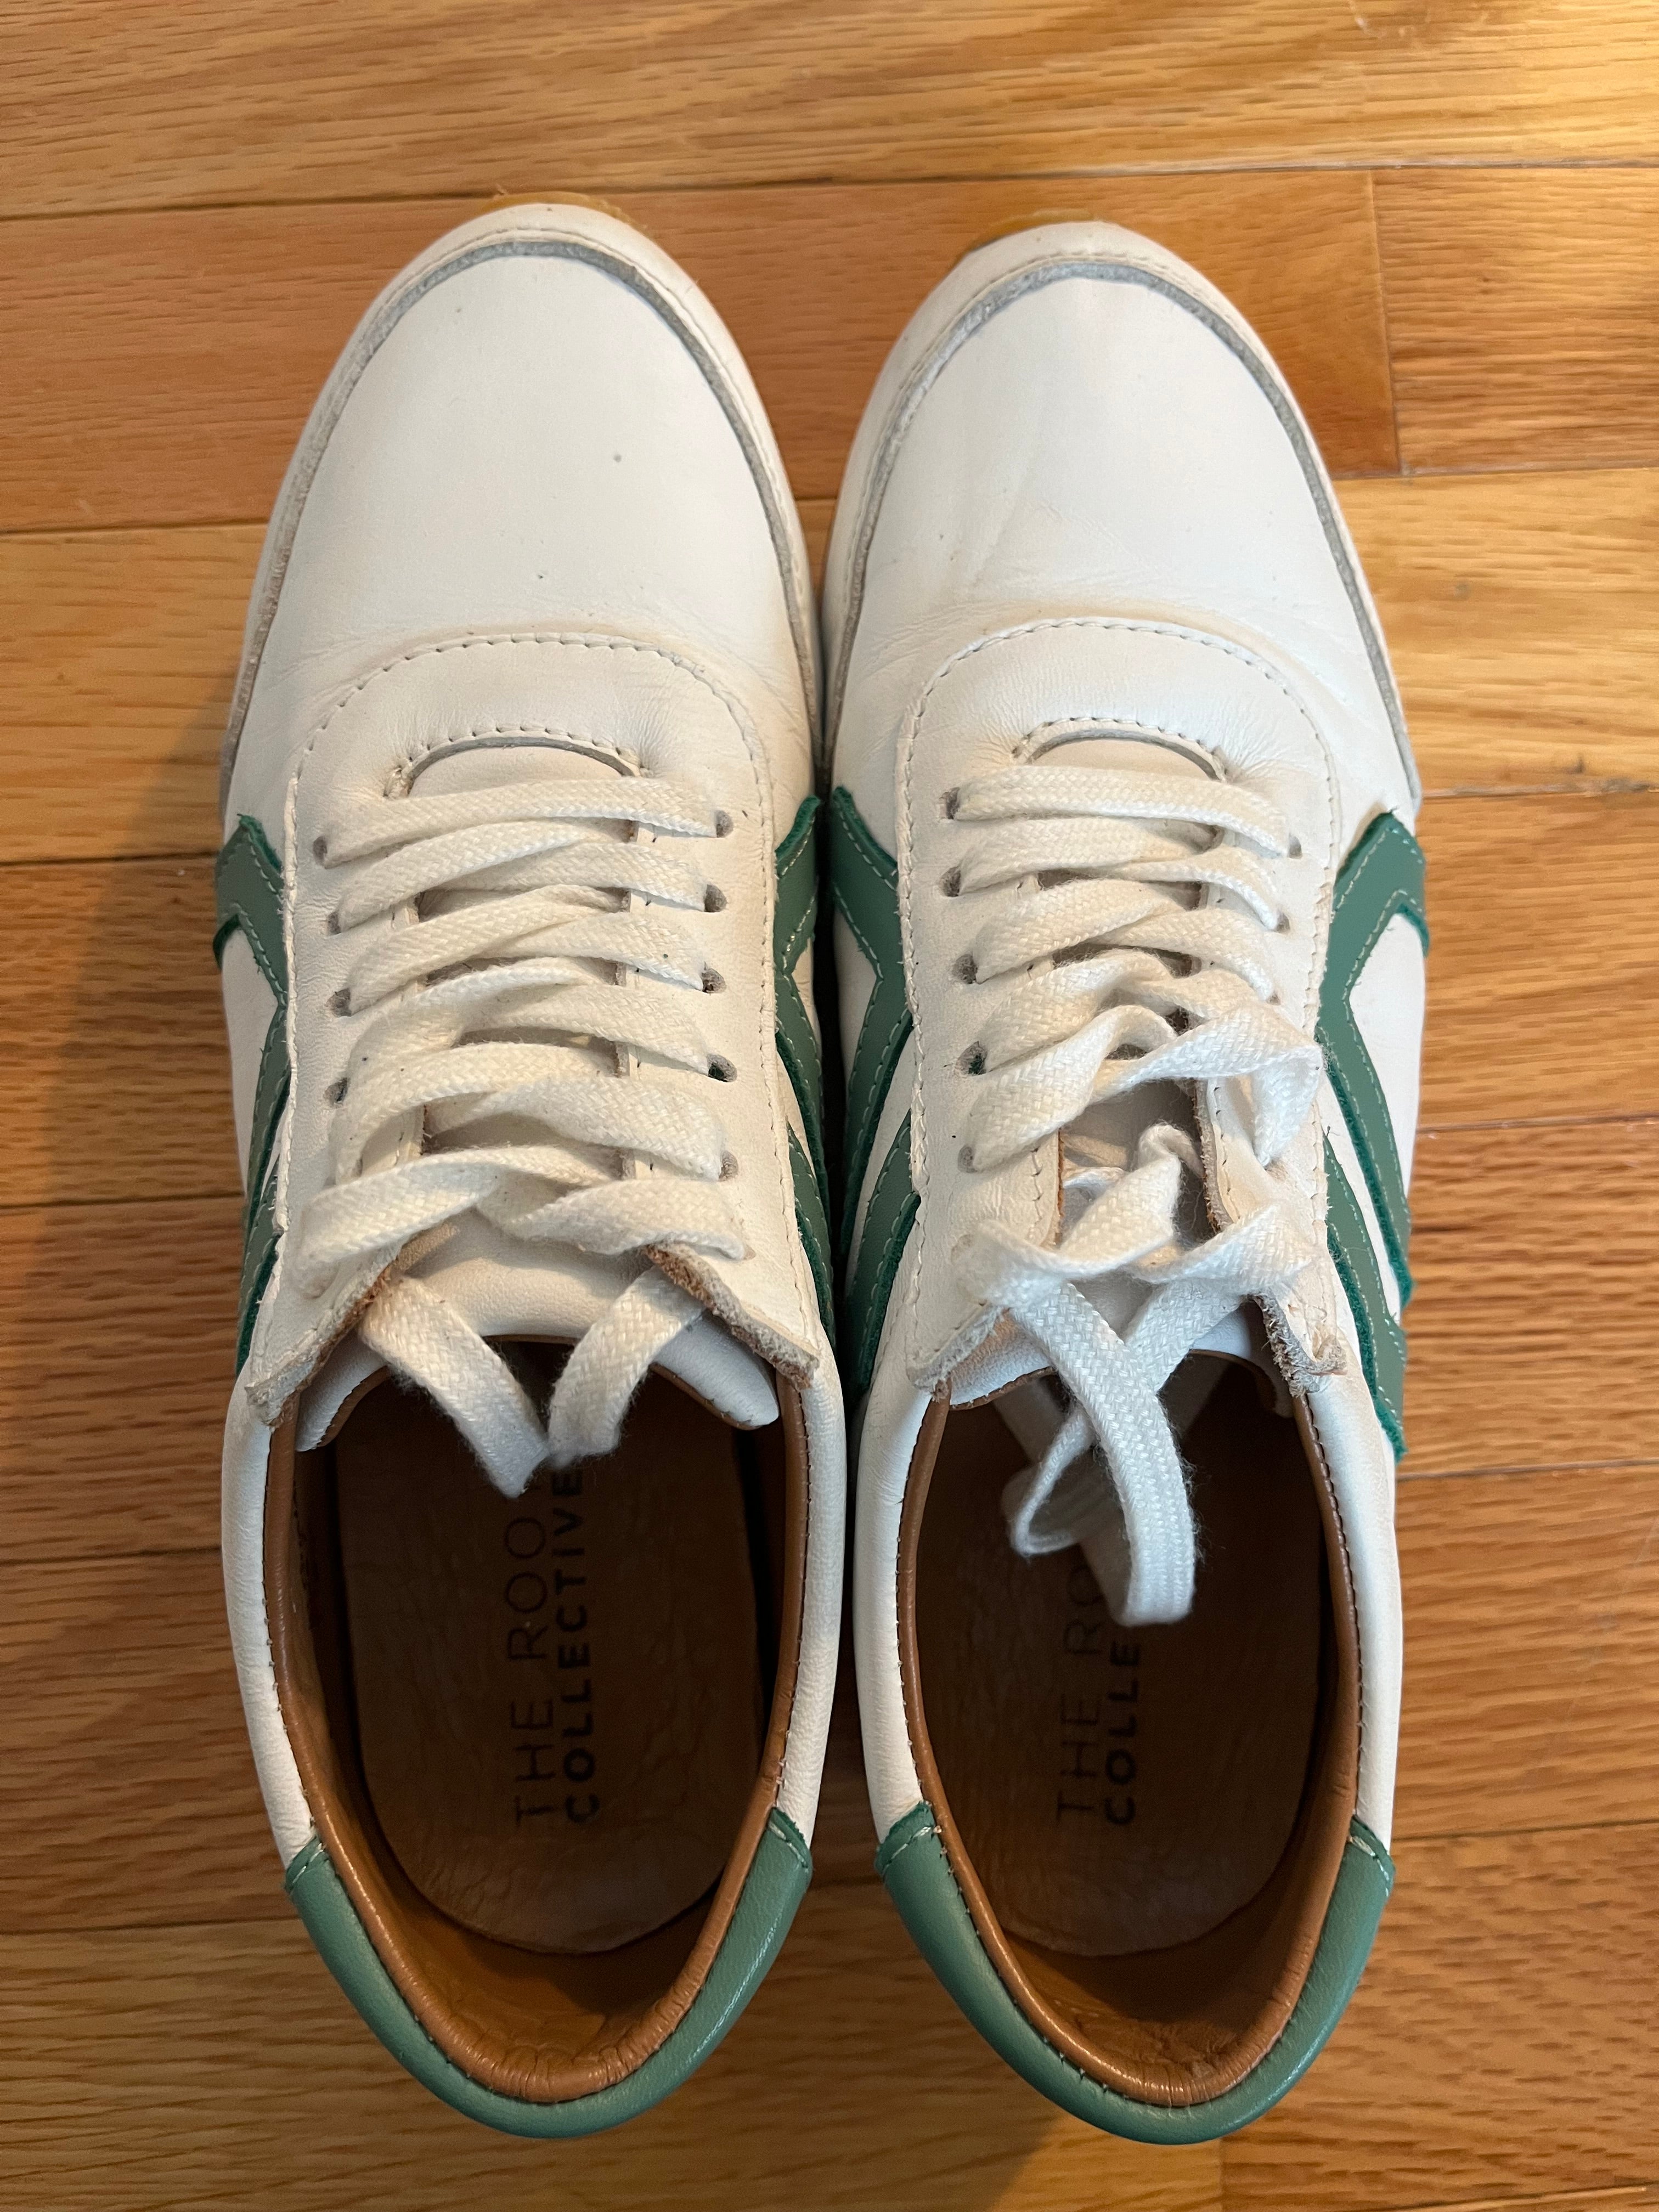 Jessie in Snow with Seafoam Hex size 7 - Pre-loved